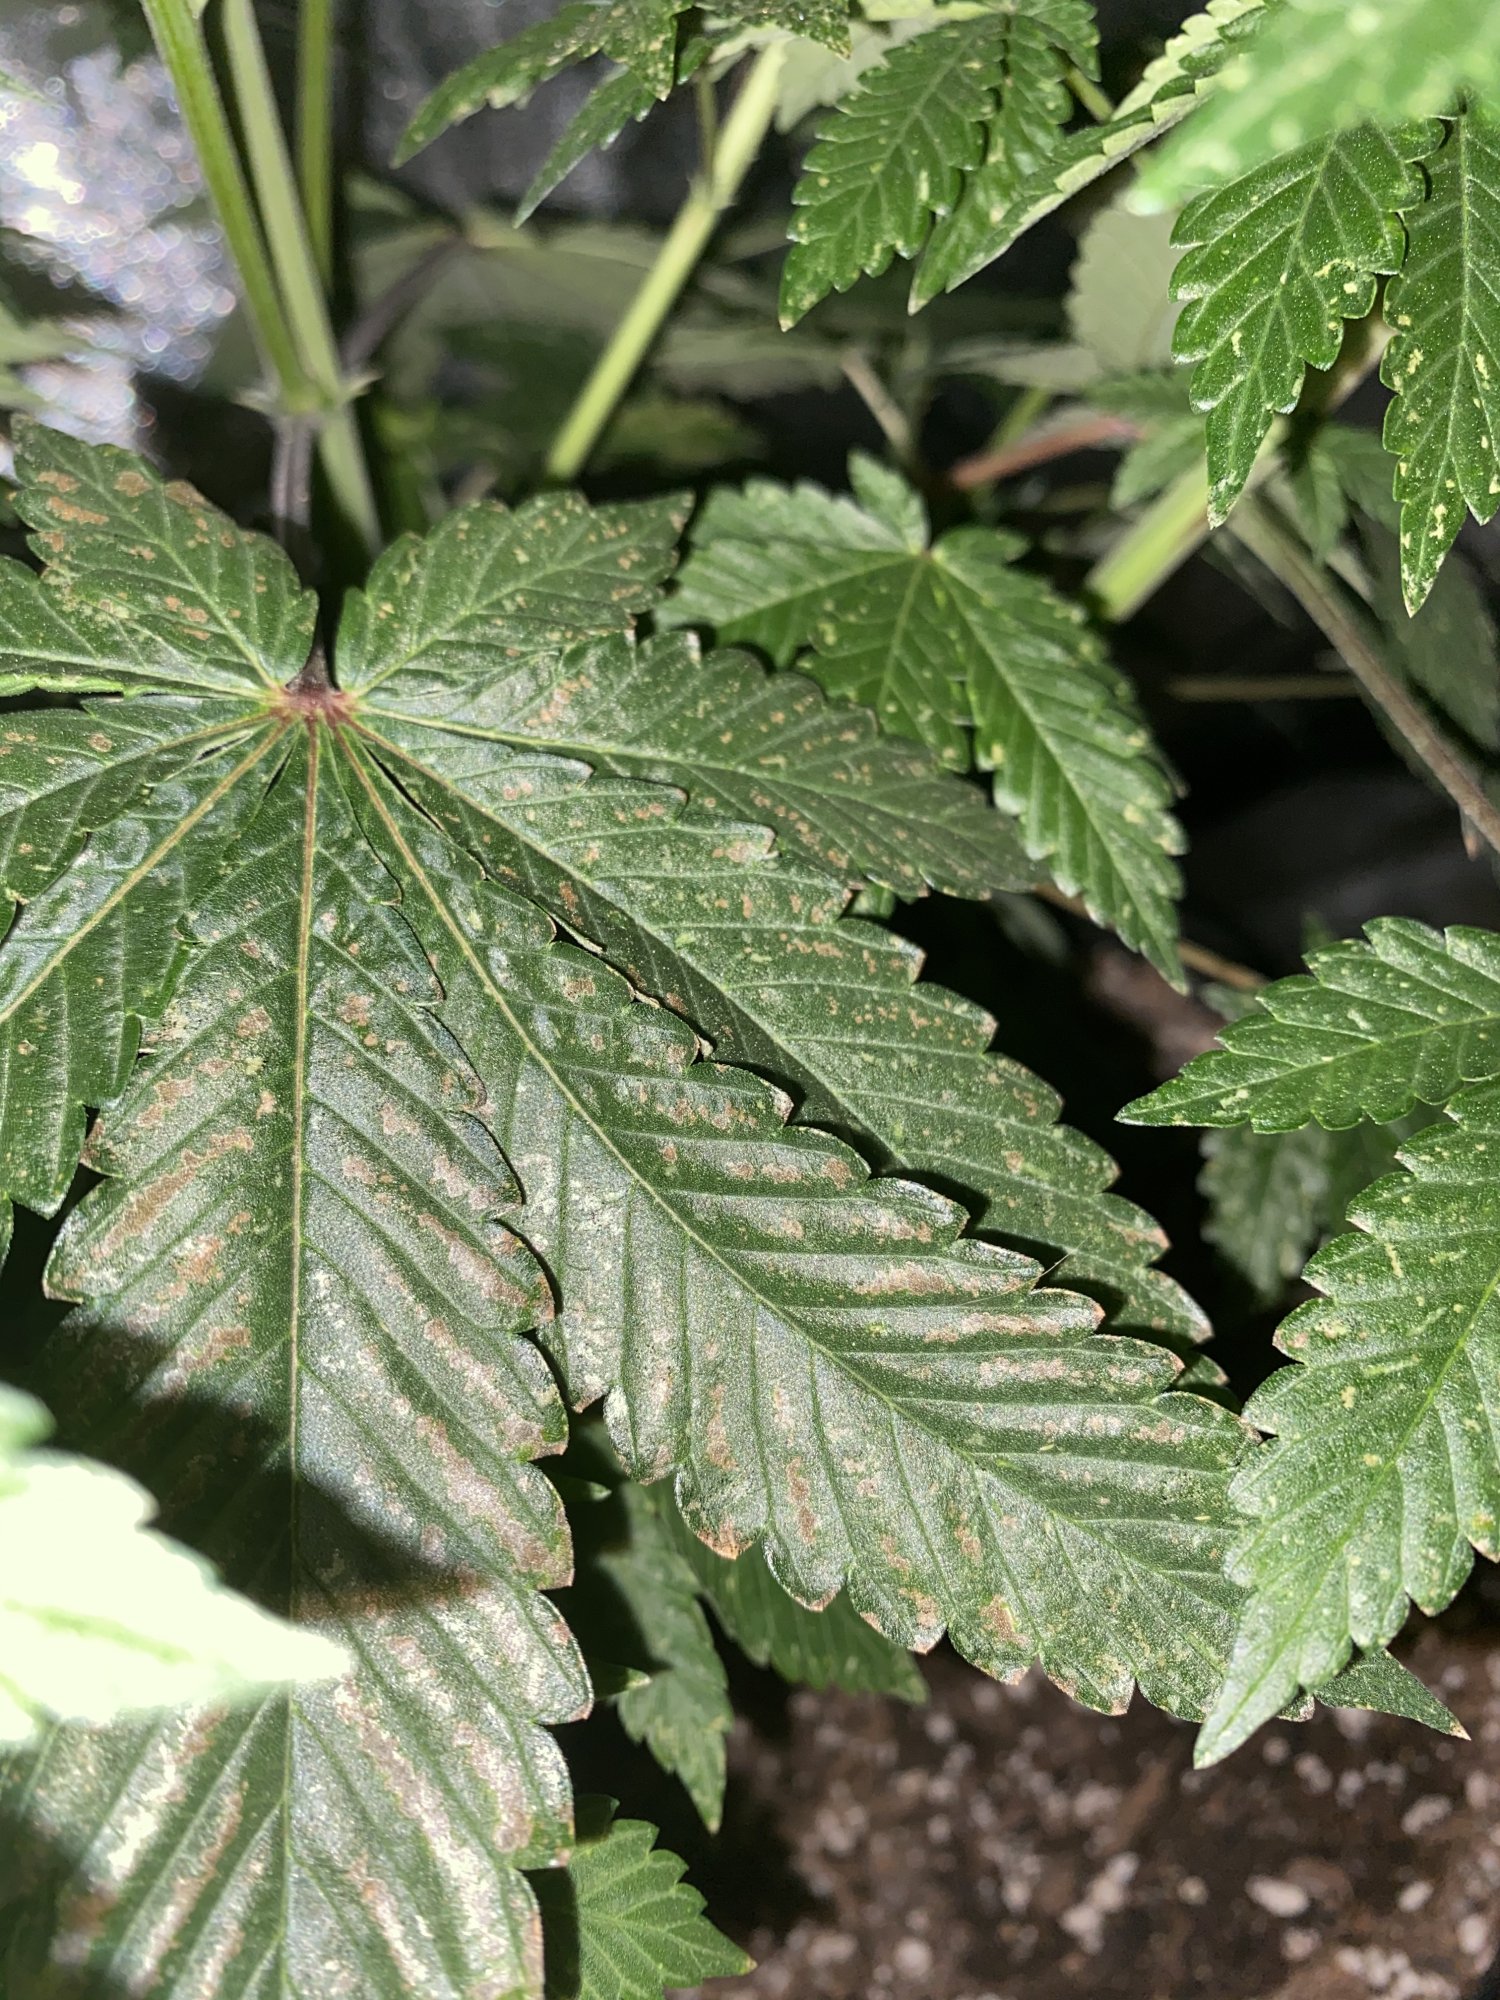 Need some help spots on leaves